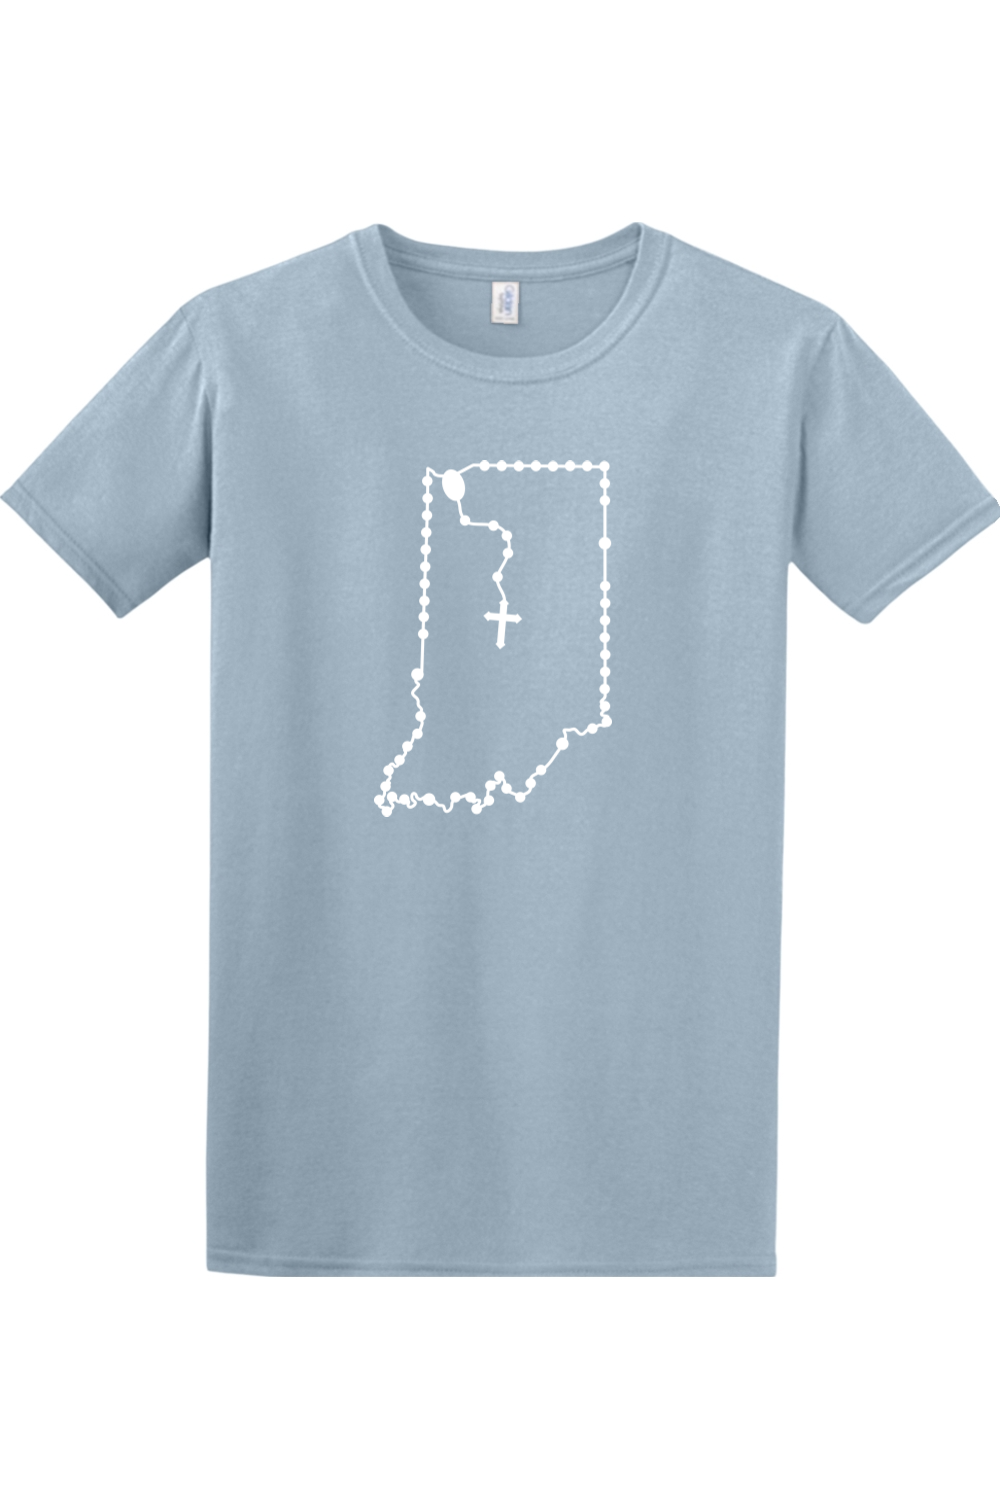 Indiana Rosary Adult T-shirt